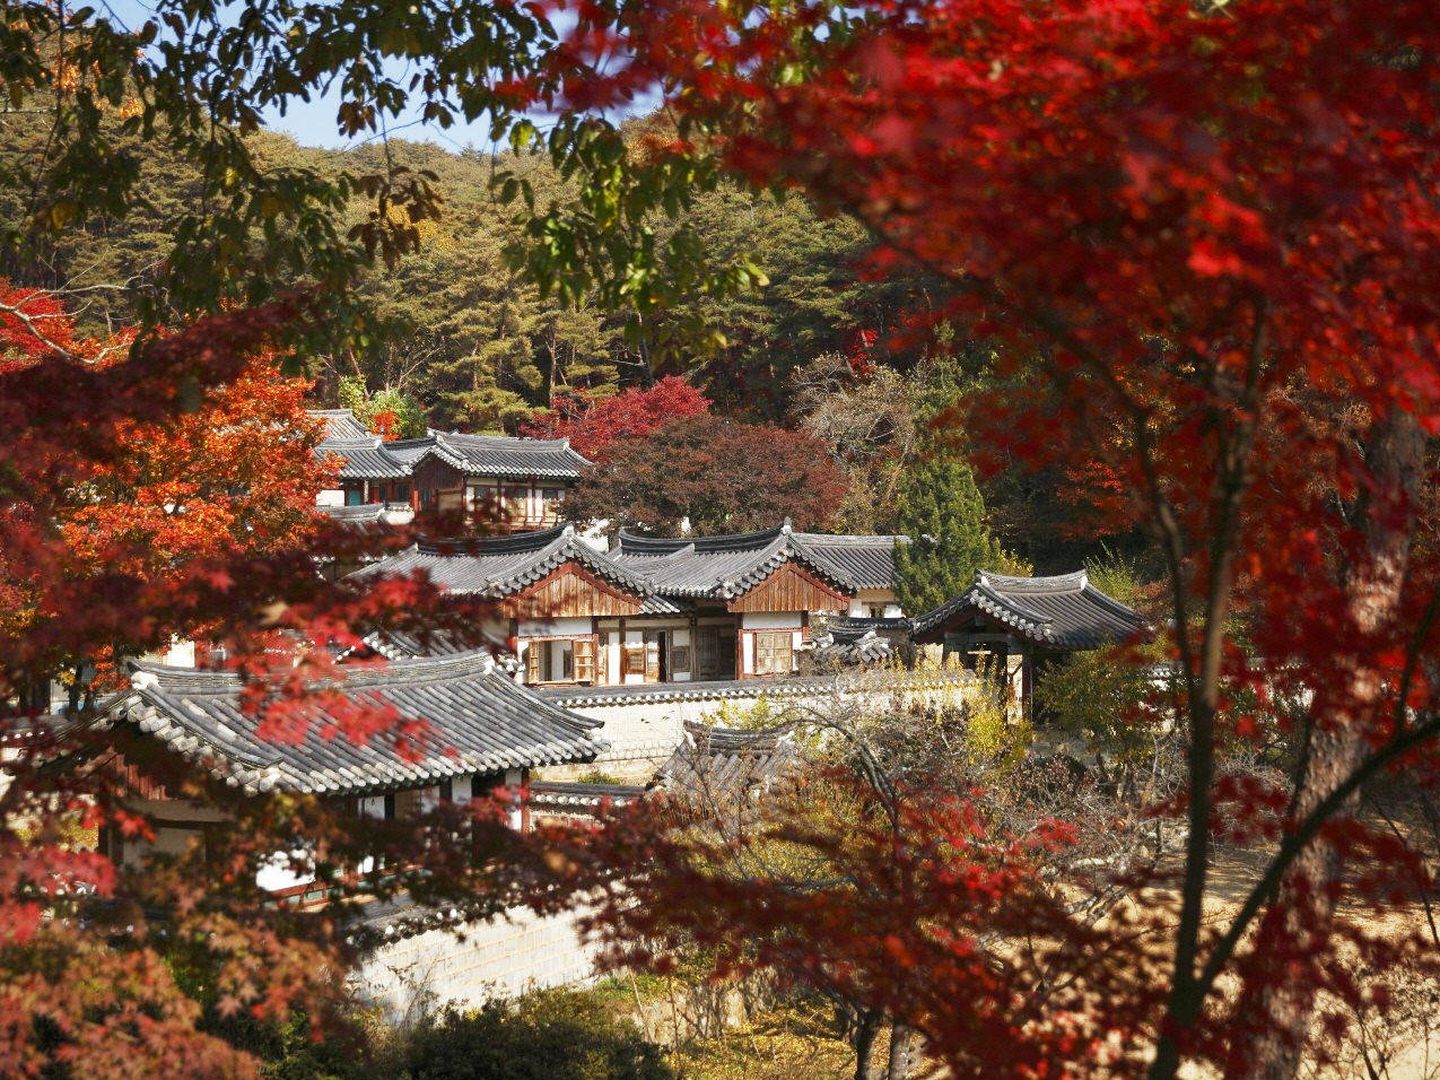 Dosan Seowon (Oh Jong-eun © Council for Promotion of the Inscription of Confucian Academies on the World Heritage List)